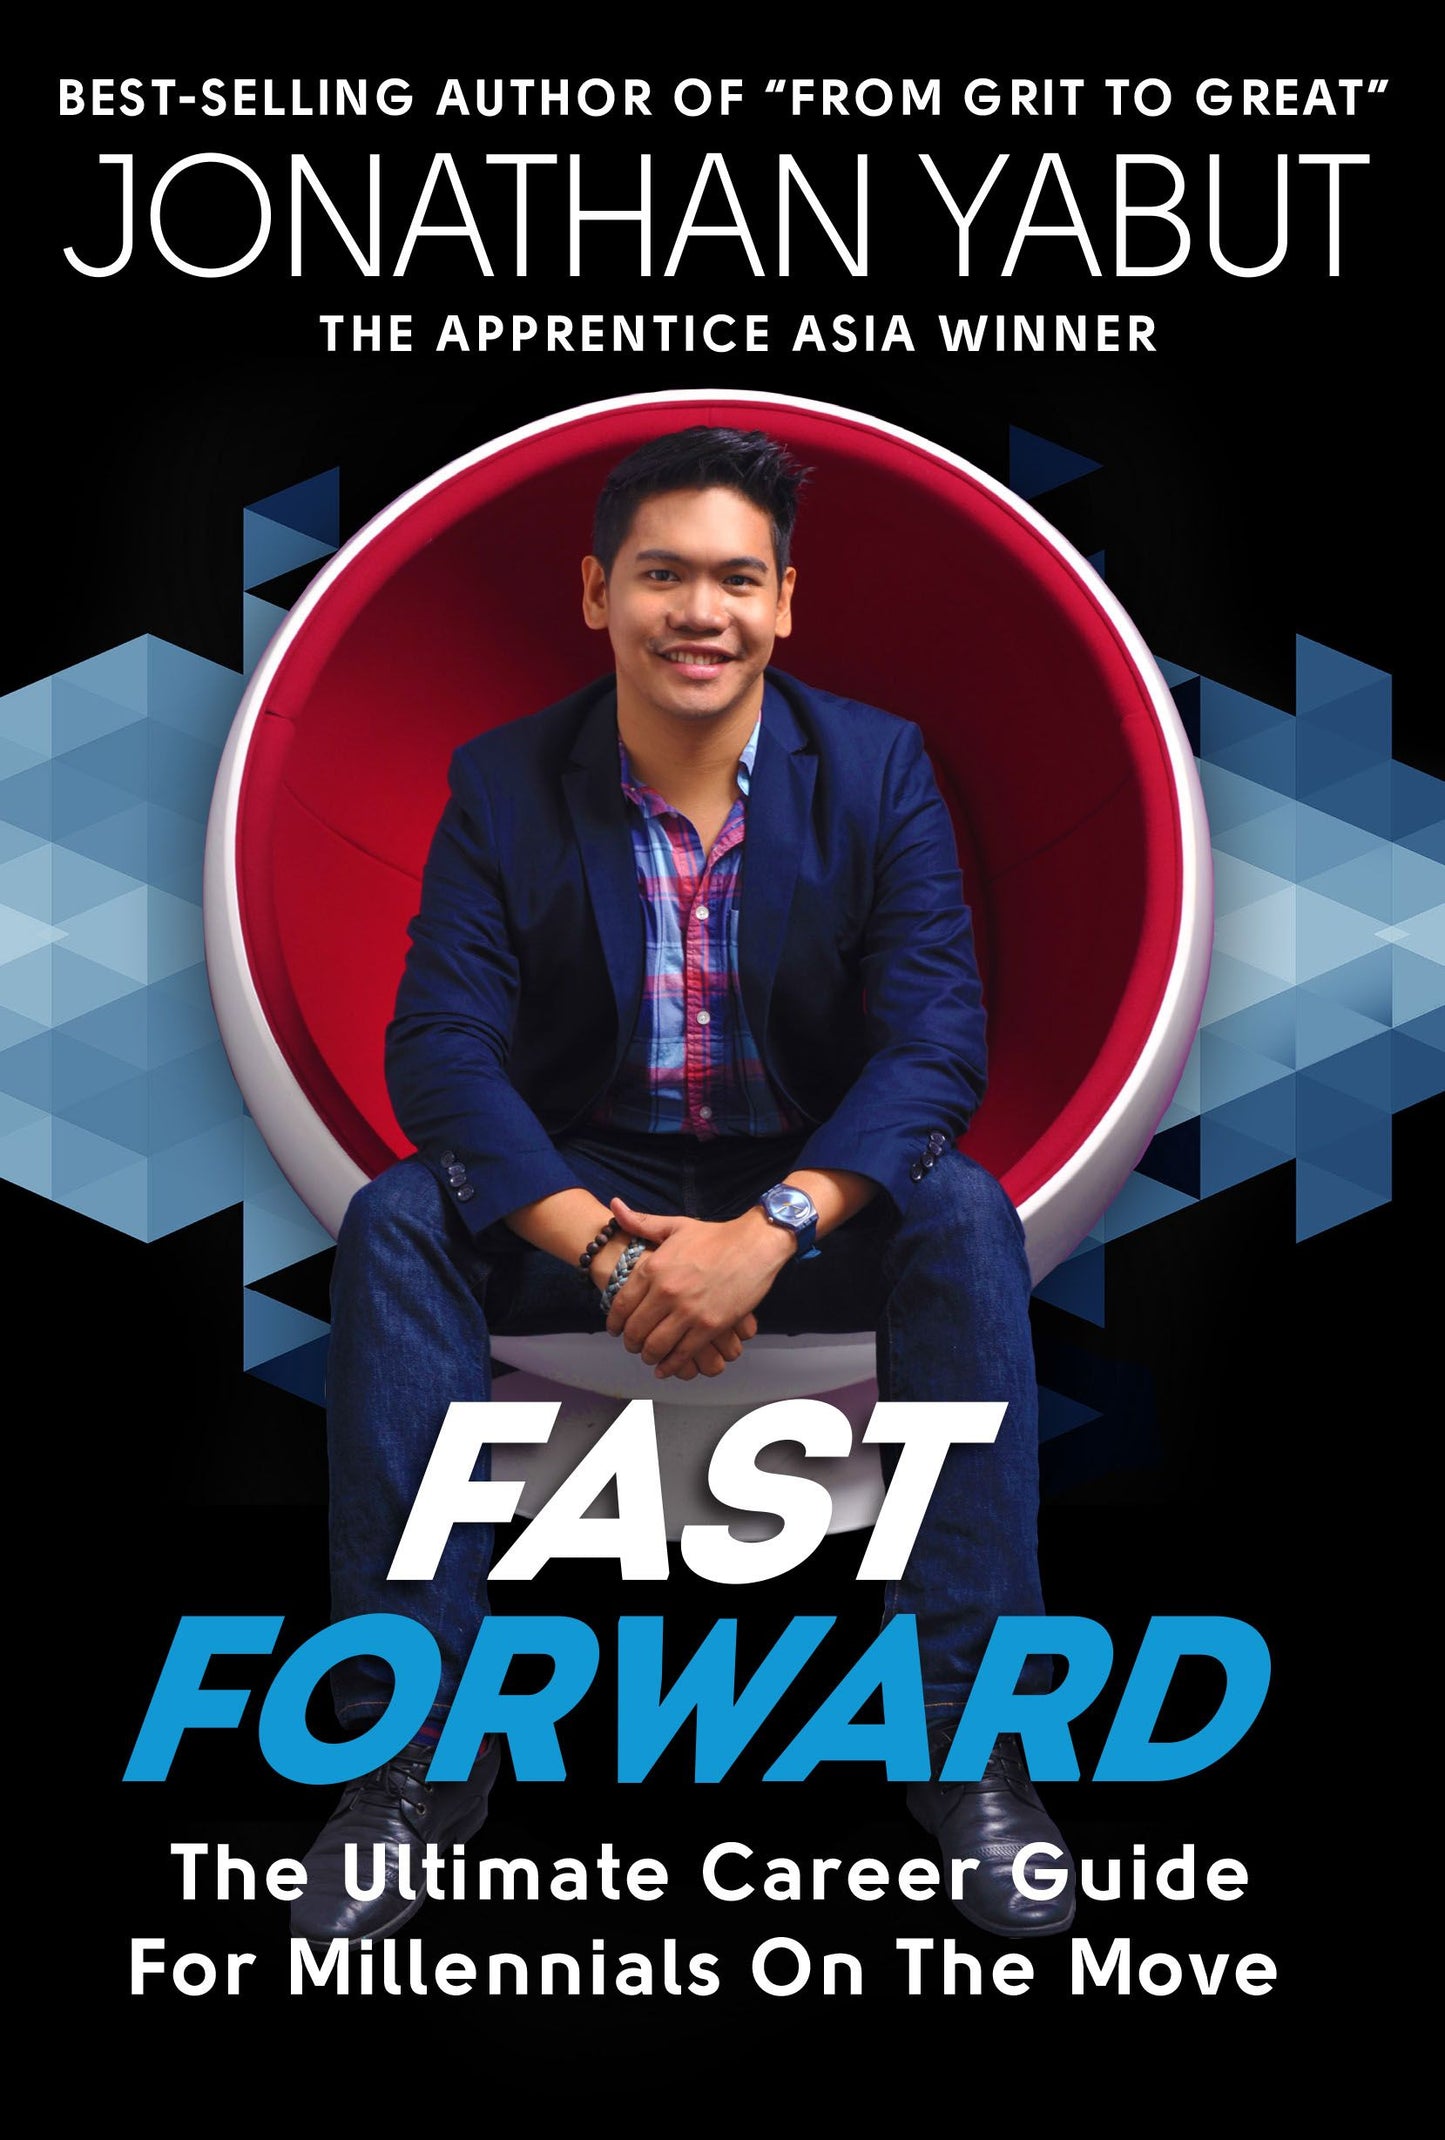 Fast Forward: The Ultimate Career Guide For Millennials On The Move